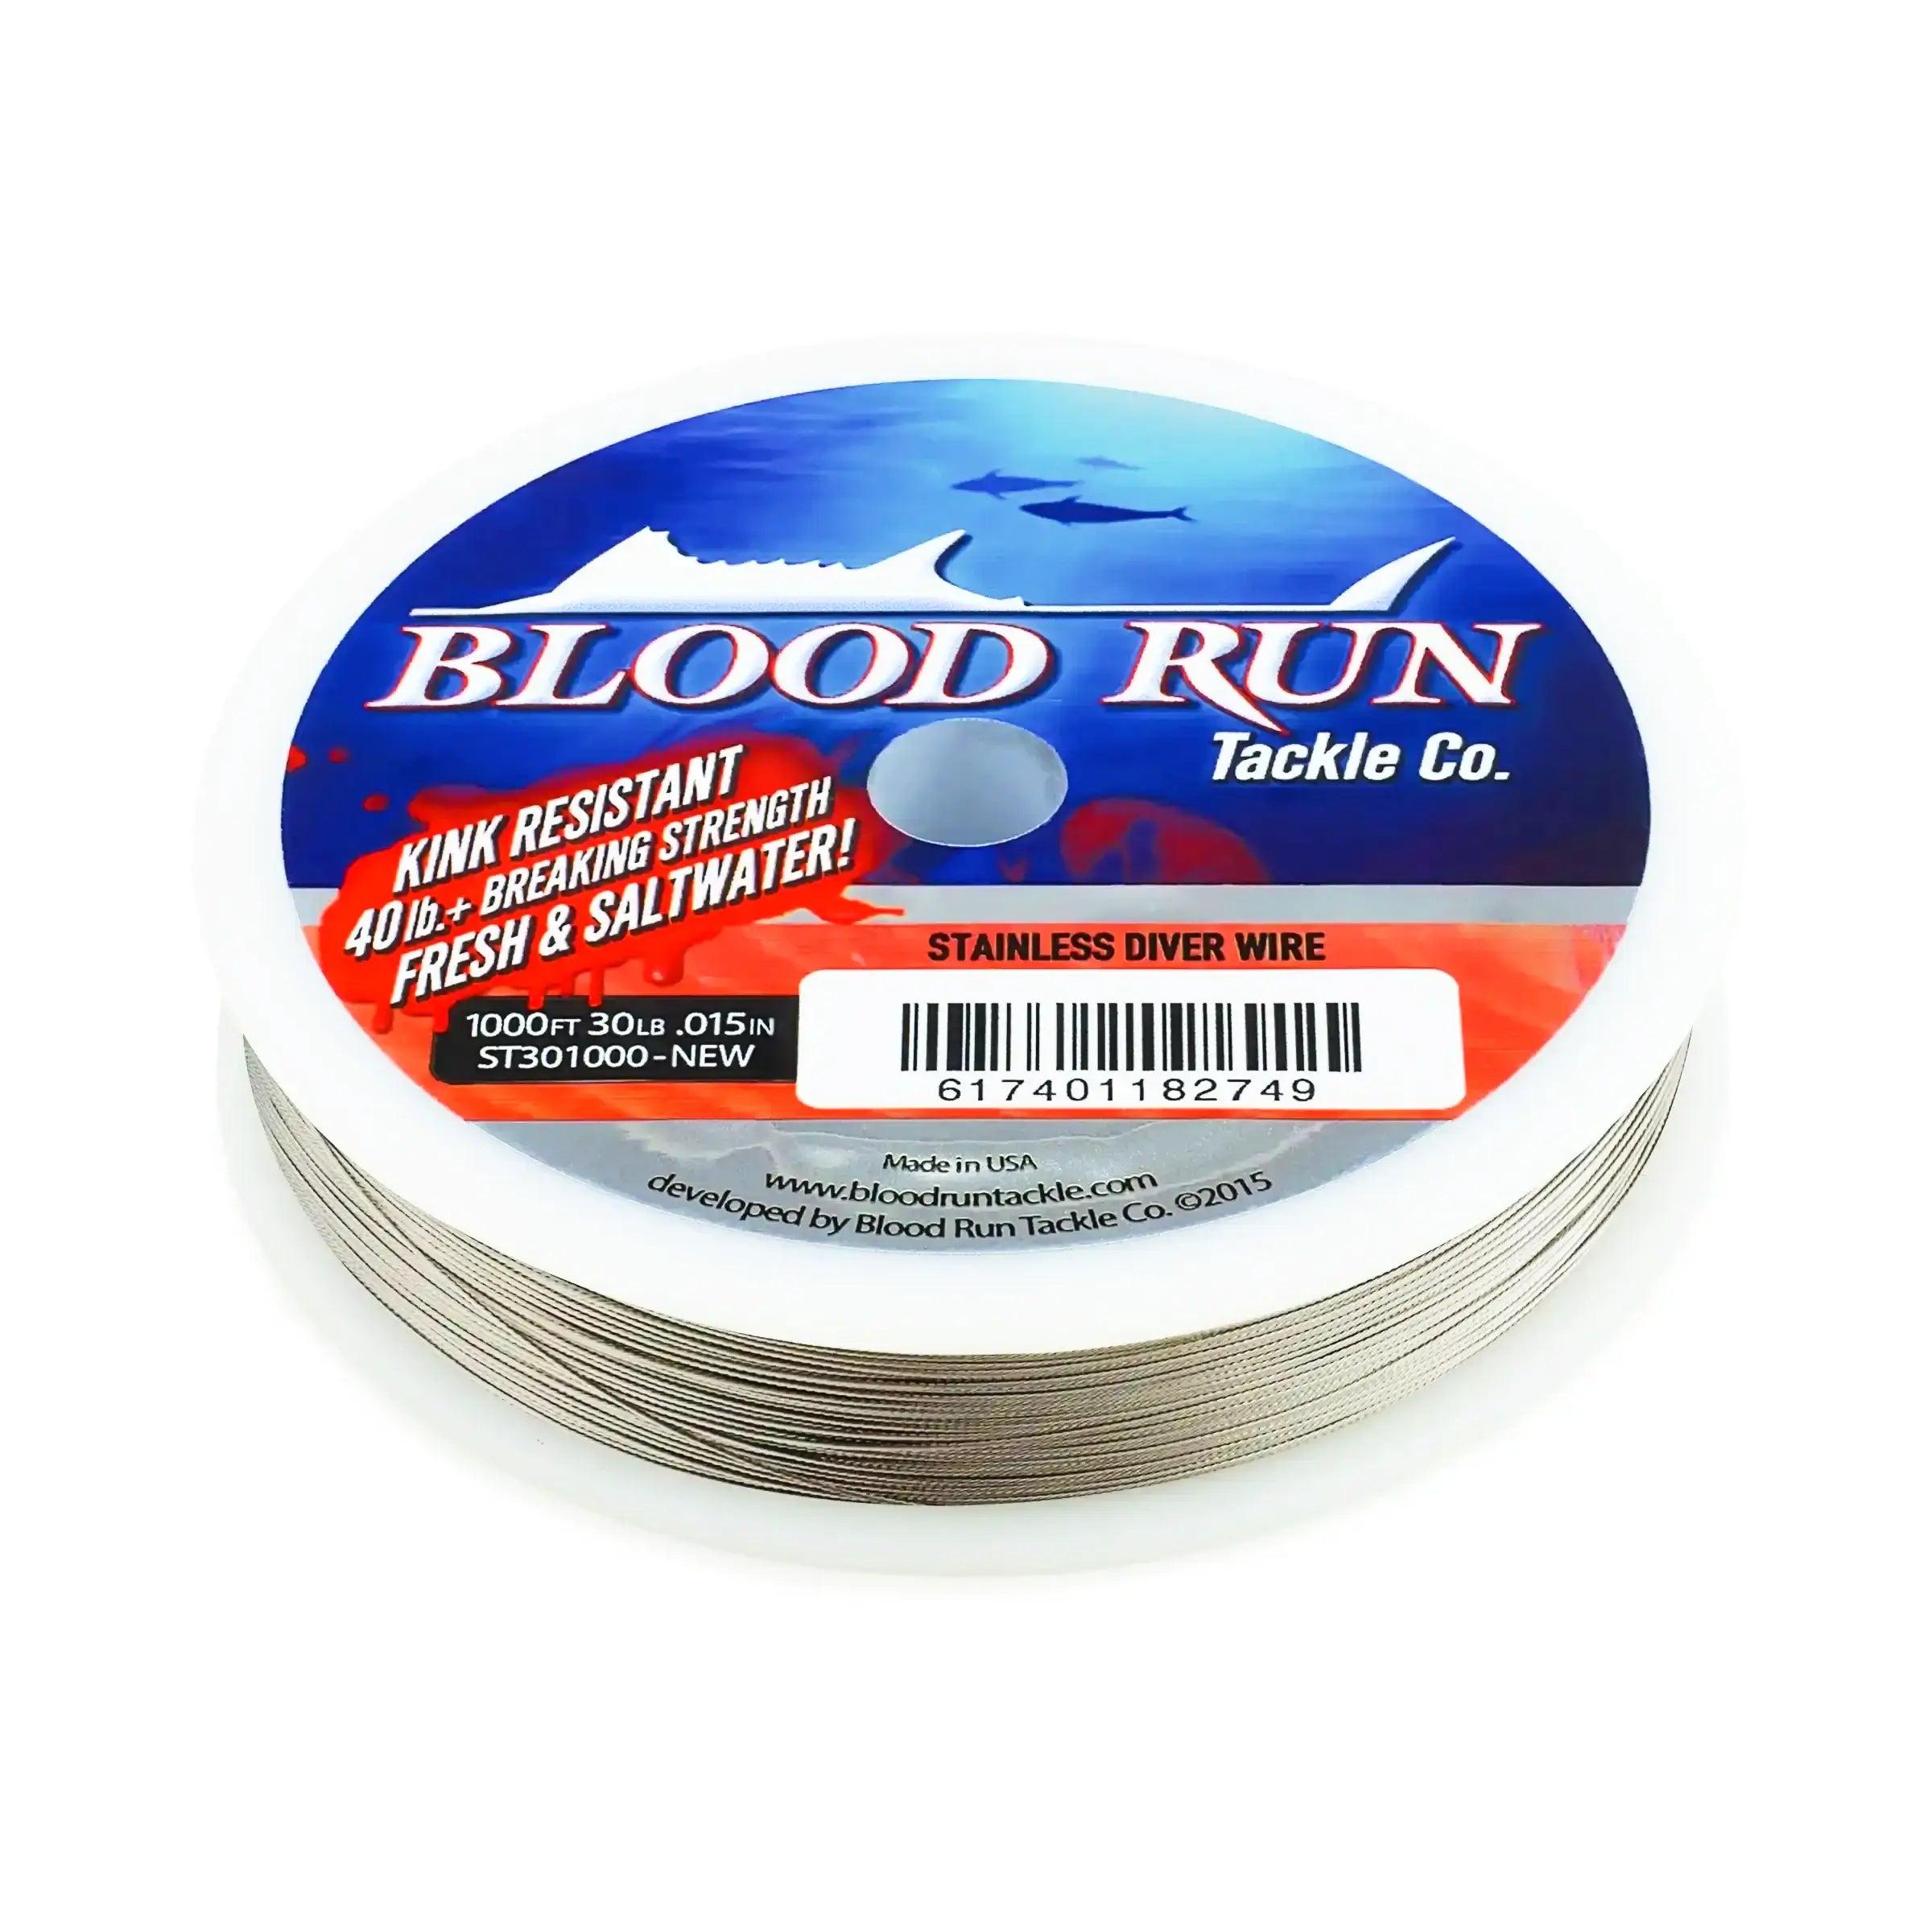 30lb Stainless Diver Wire from Blood Run Fishing 10000